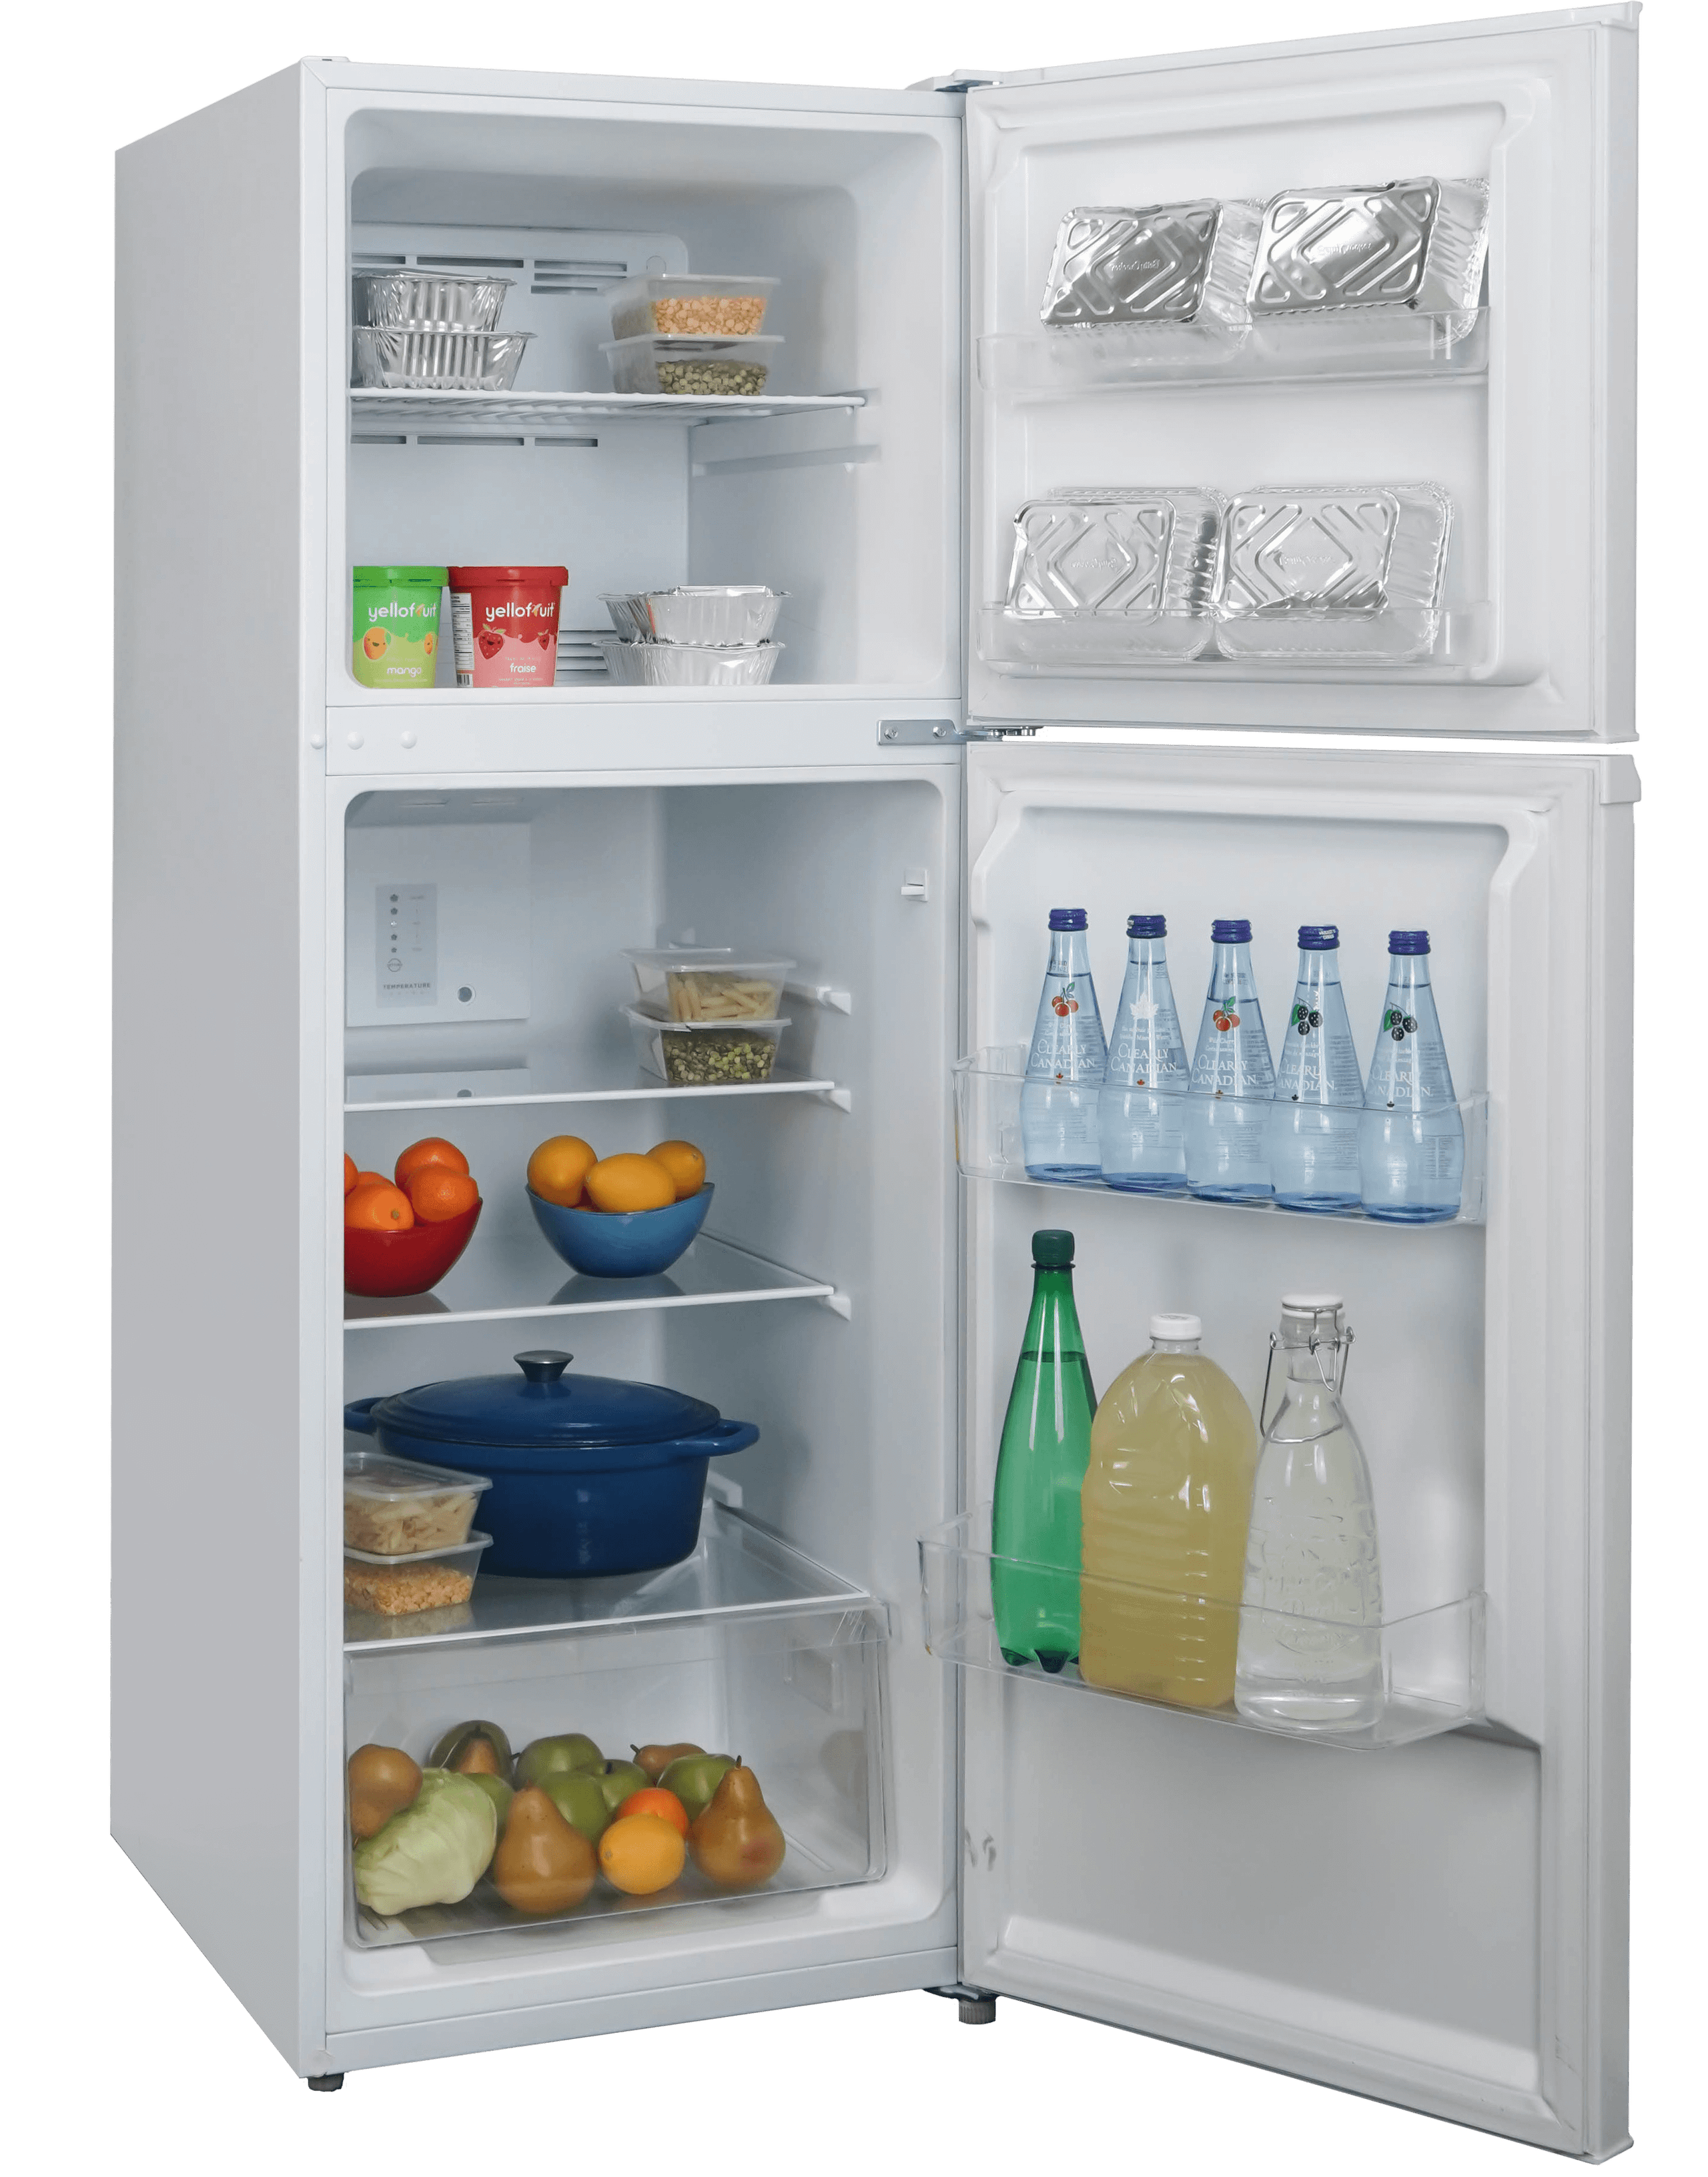 Danby 10.0 cu. ft. Apartment Size Fridge Top Mount in White